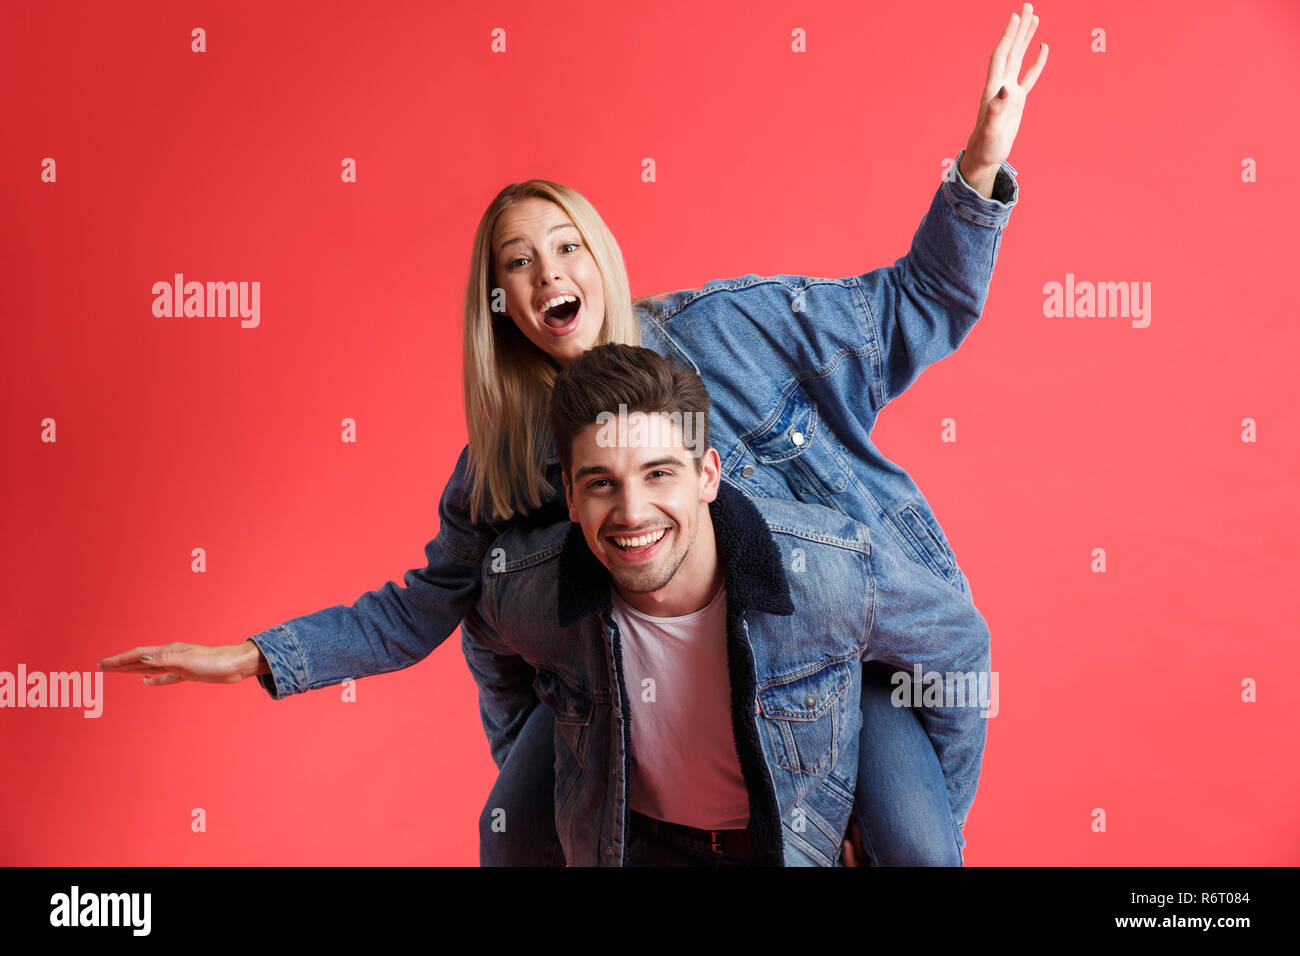 Portrait of a happy young couple dressed in denim jackets standing together isolated over red background, piggyback ride Stock Photo